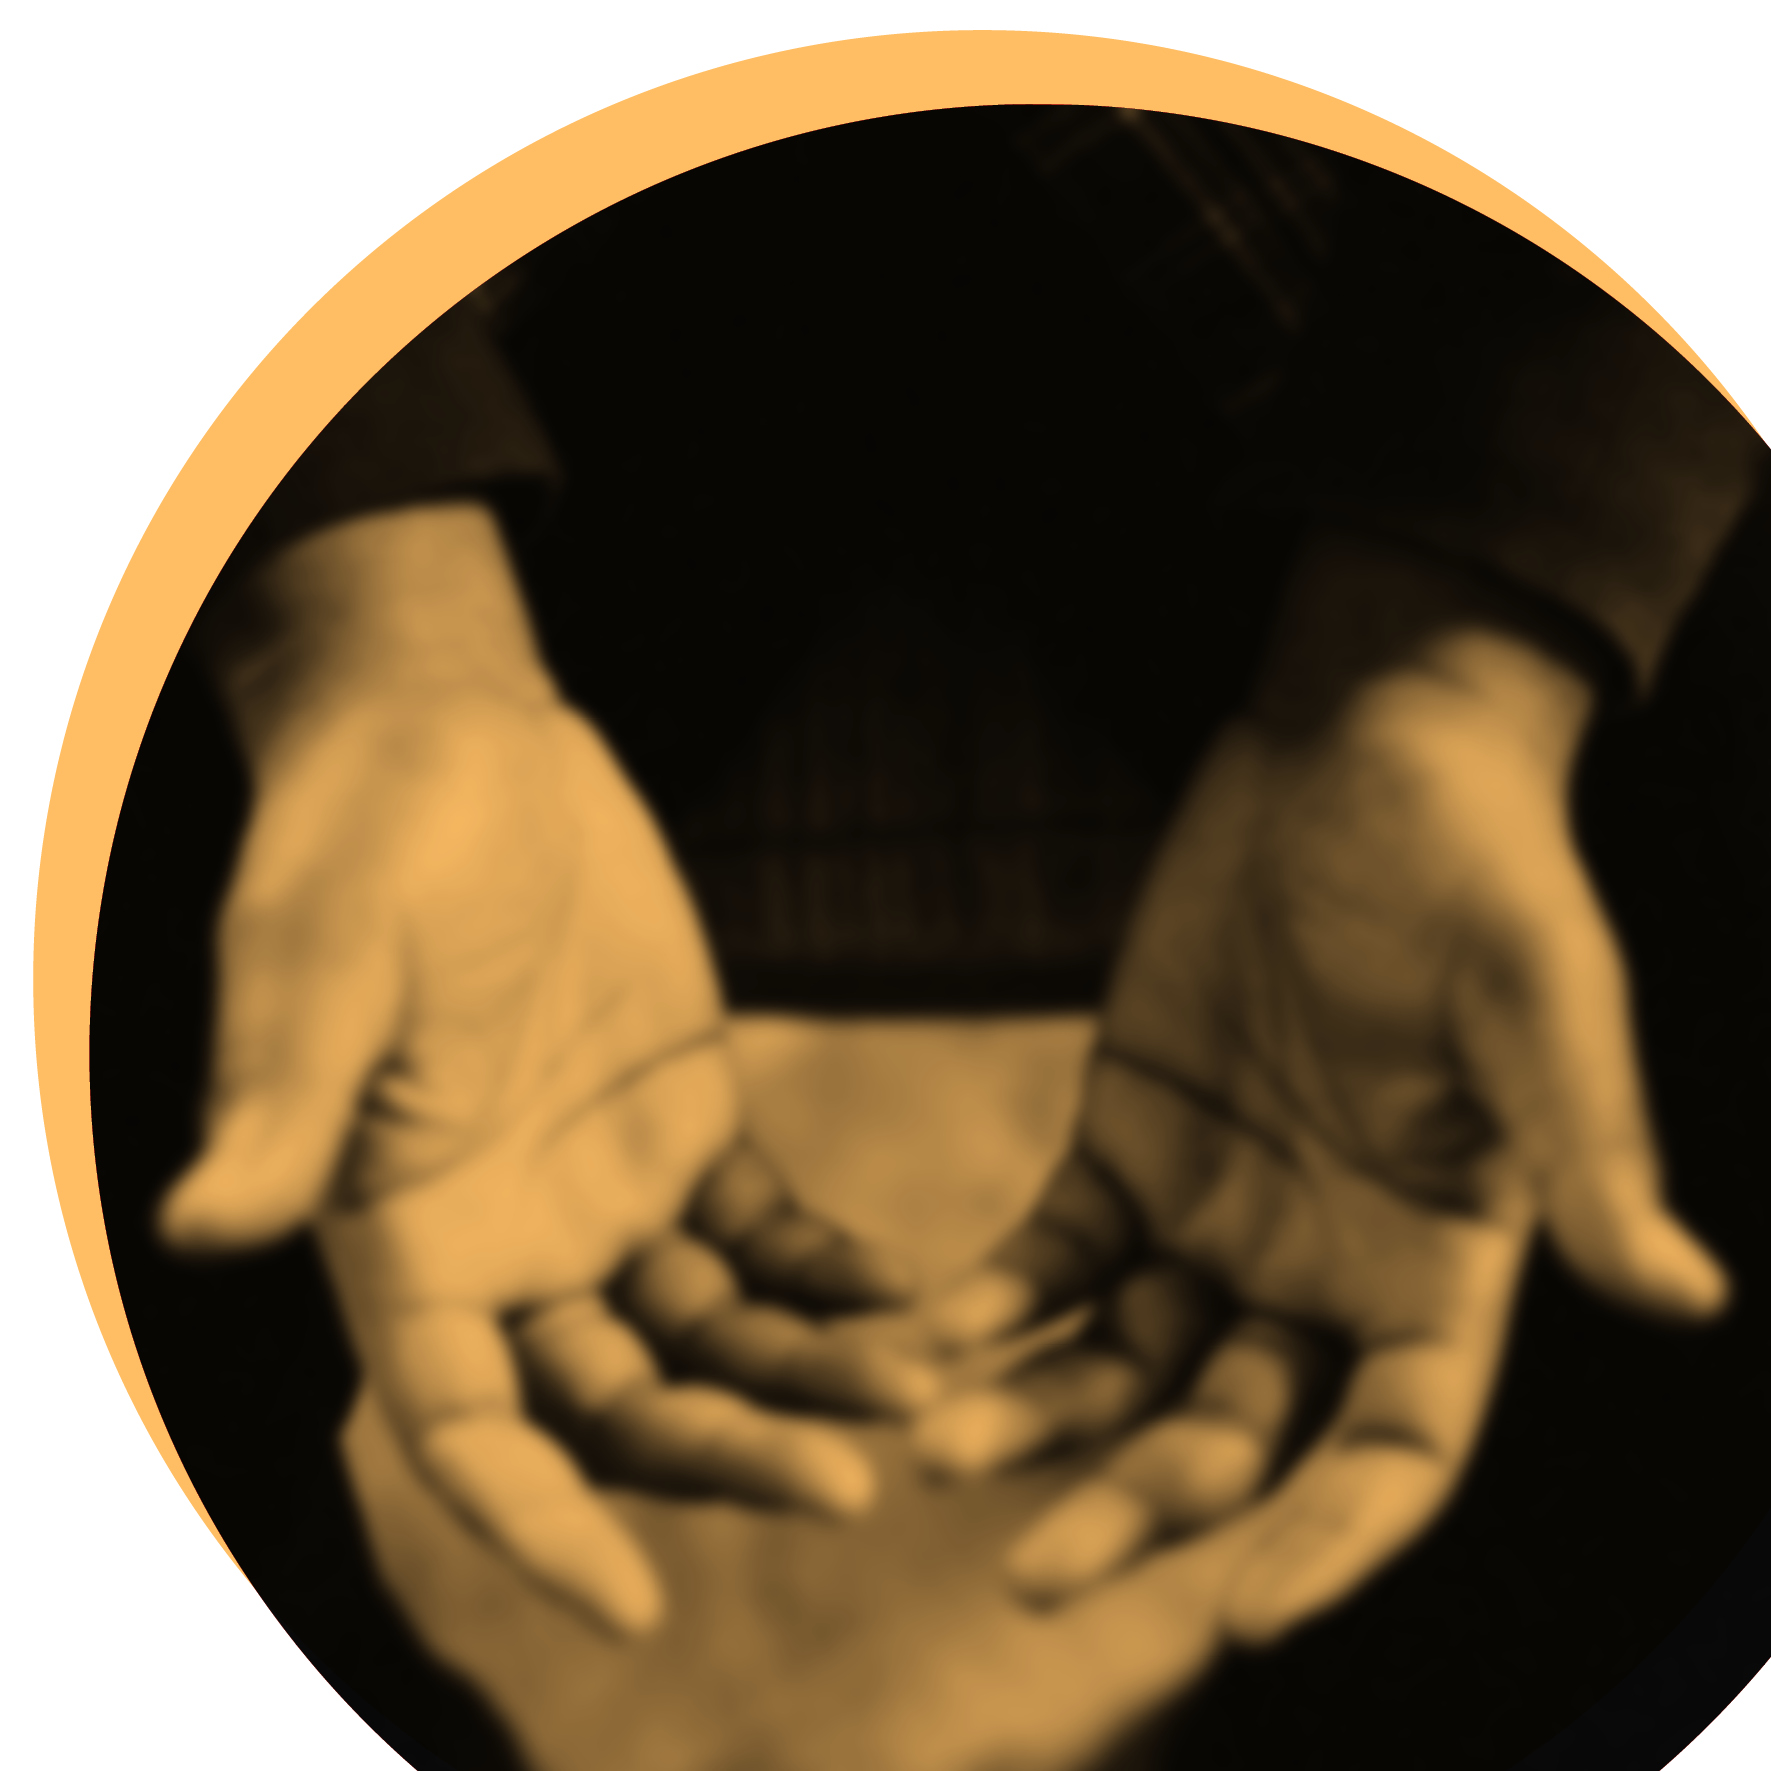 Image of two hands, palms up, in a large yellow circle